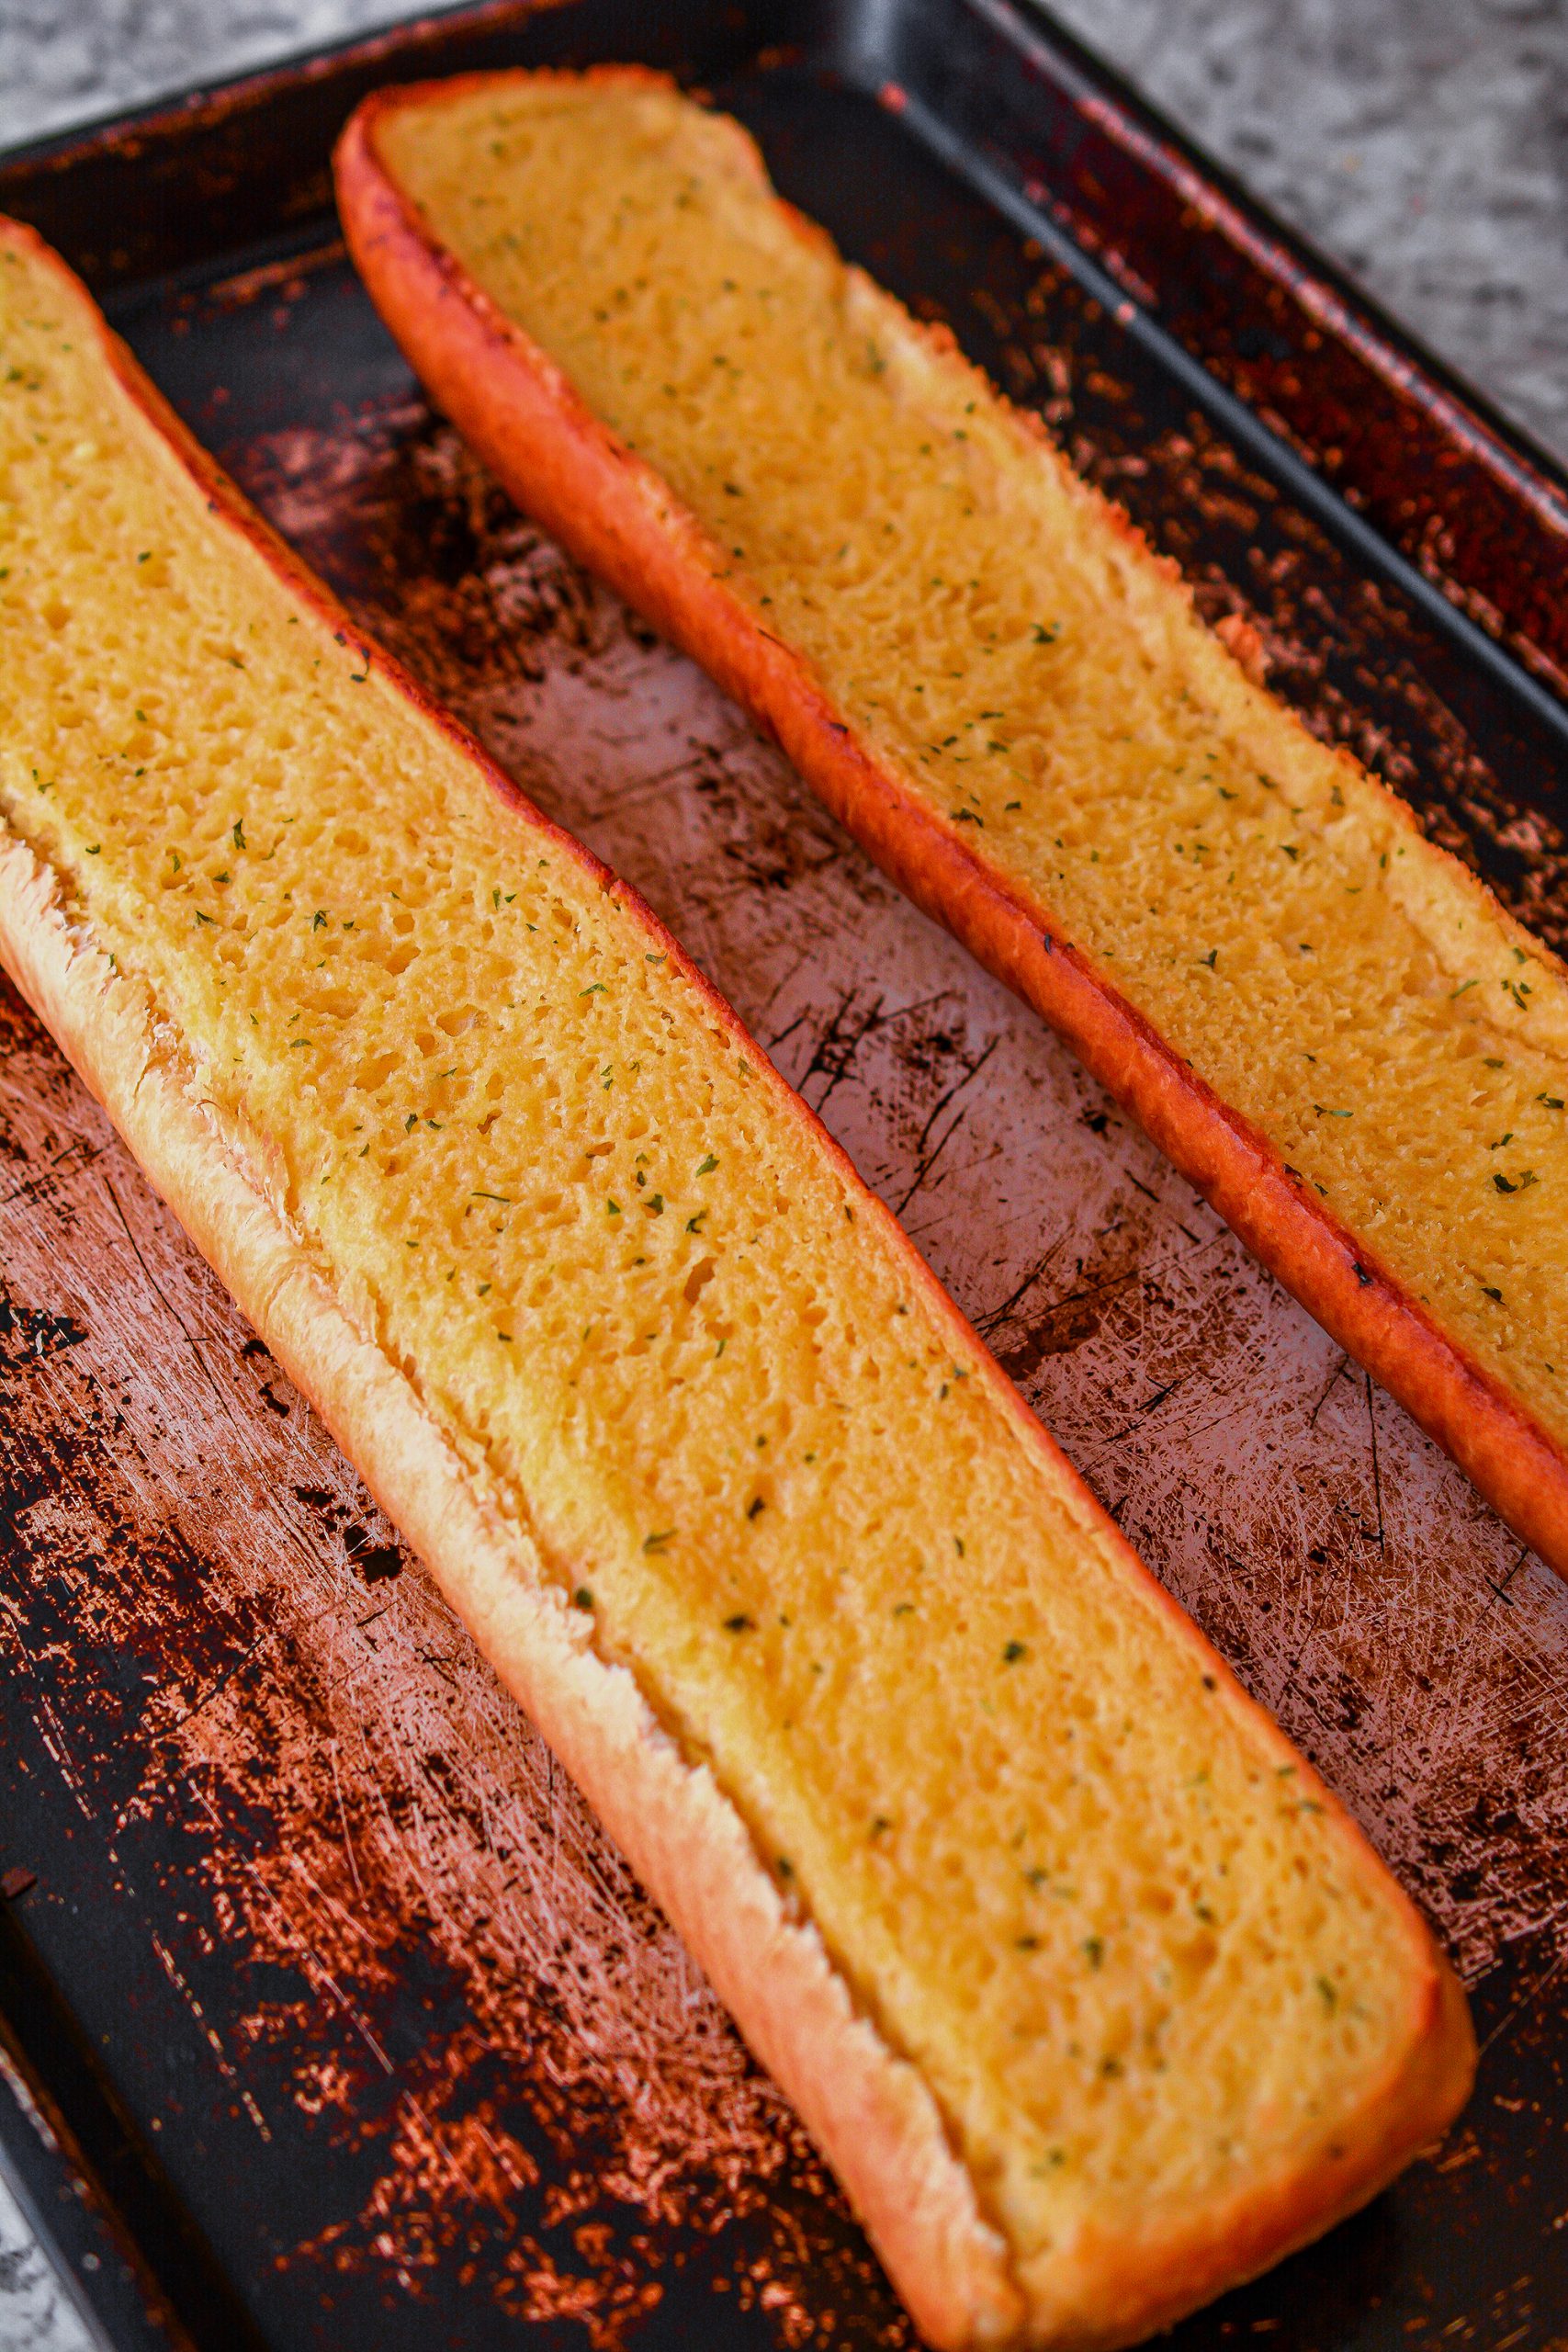 Bake the garlic bread to package instructions and leave the oven on when done.